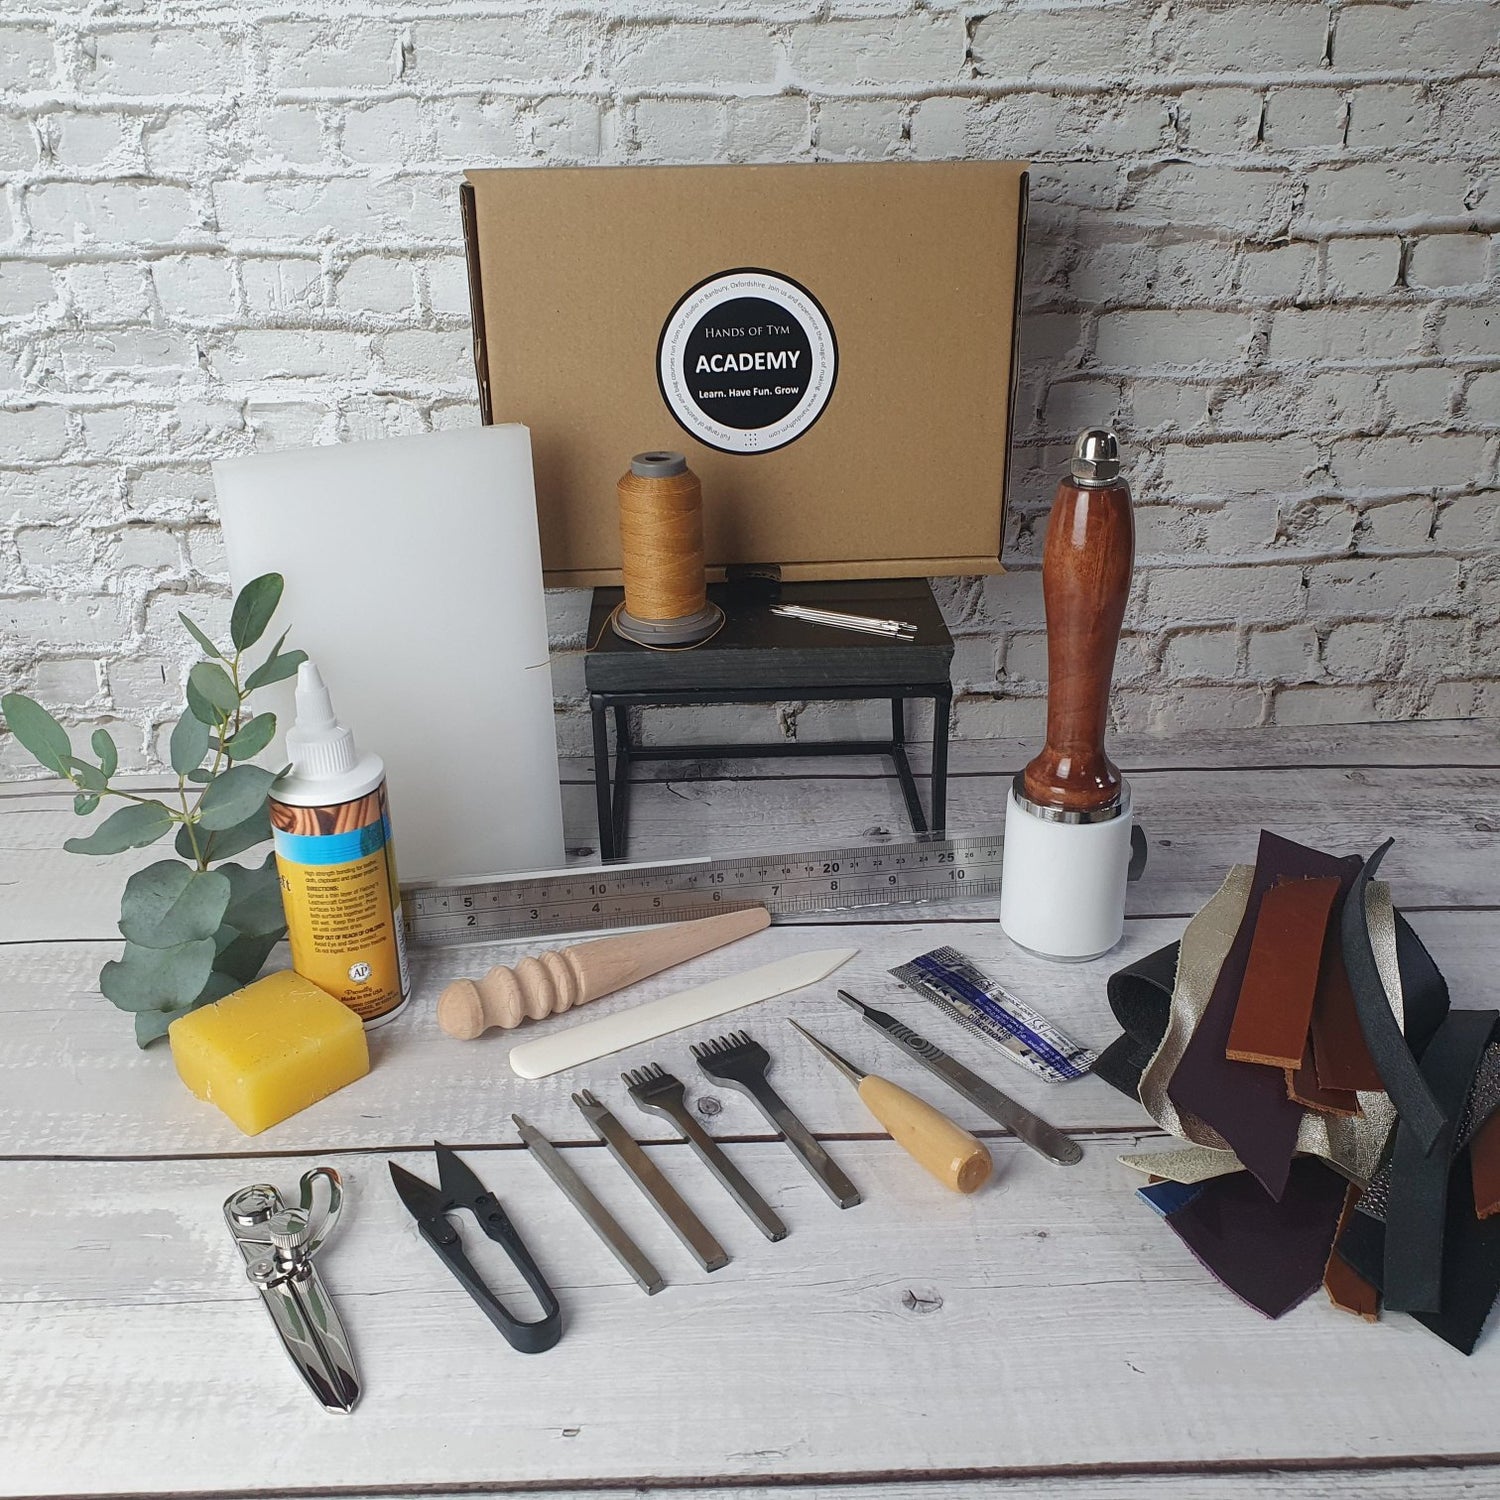 Leathercraft Tools 18piece Set Kit Leather Working Project -  Norway